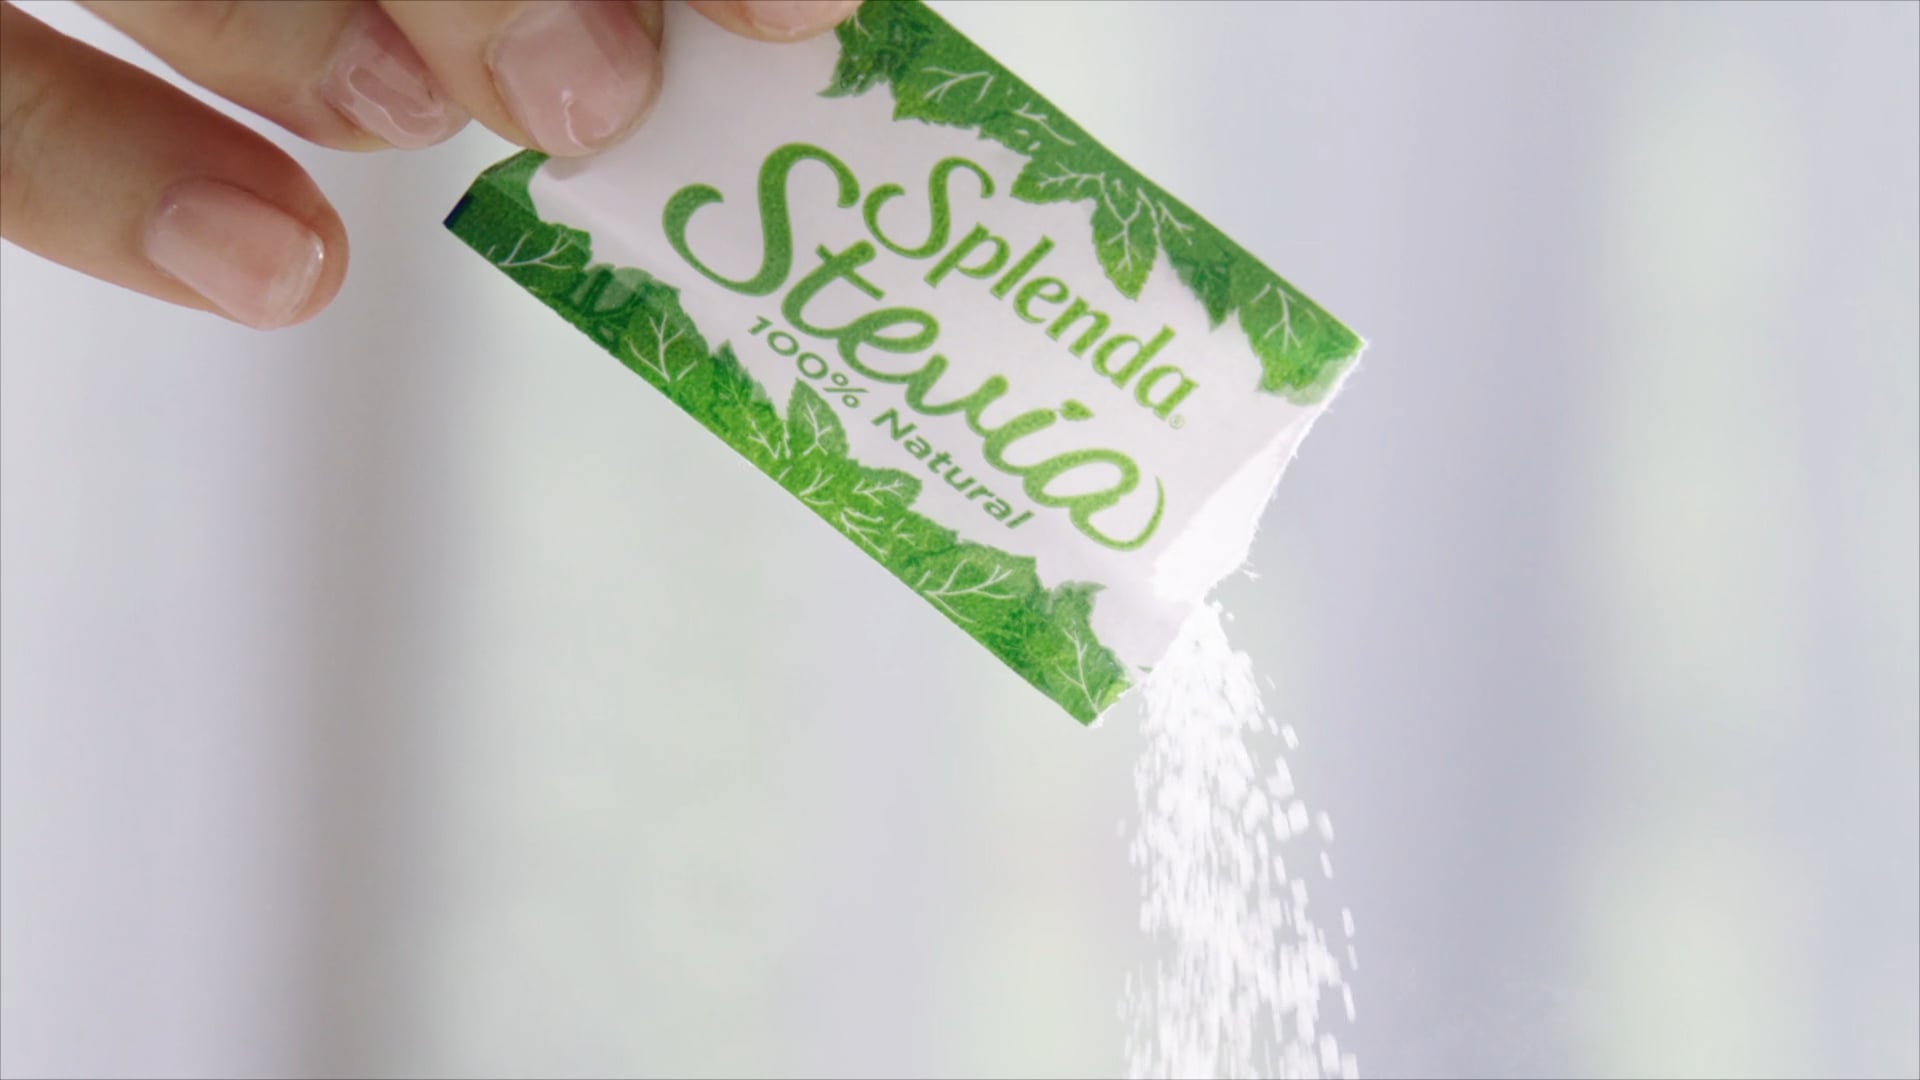 SPLENDA STEVIA - "THE SWEETEST THING YOU COULD GROW"